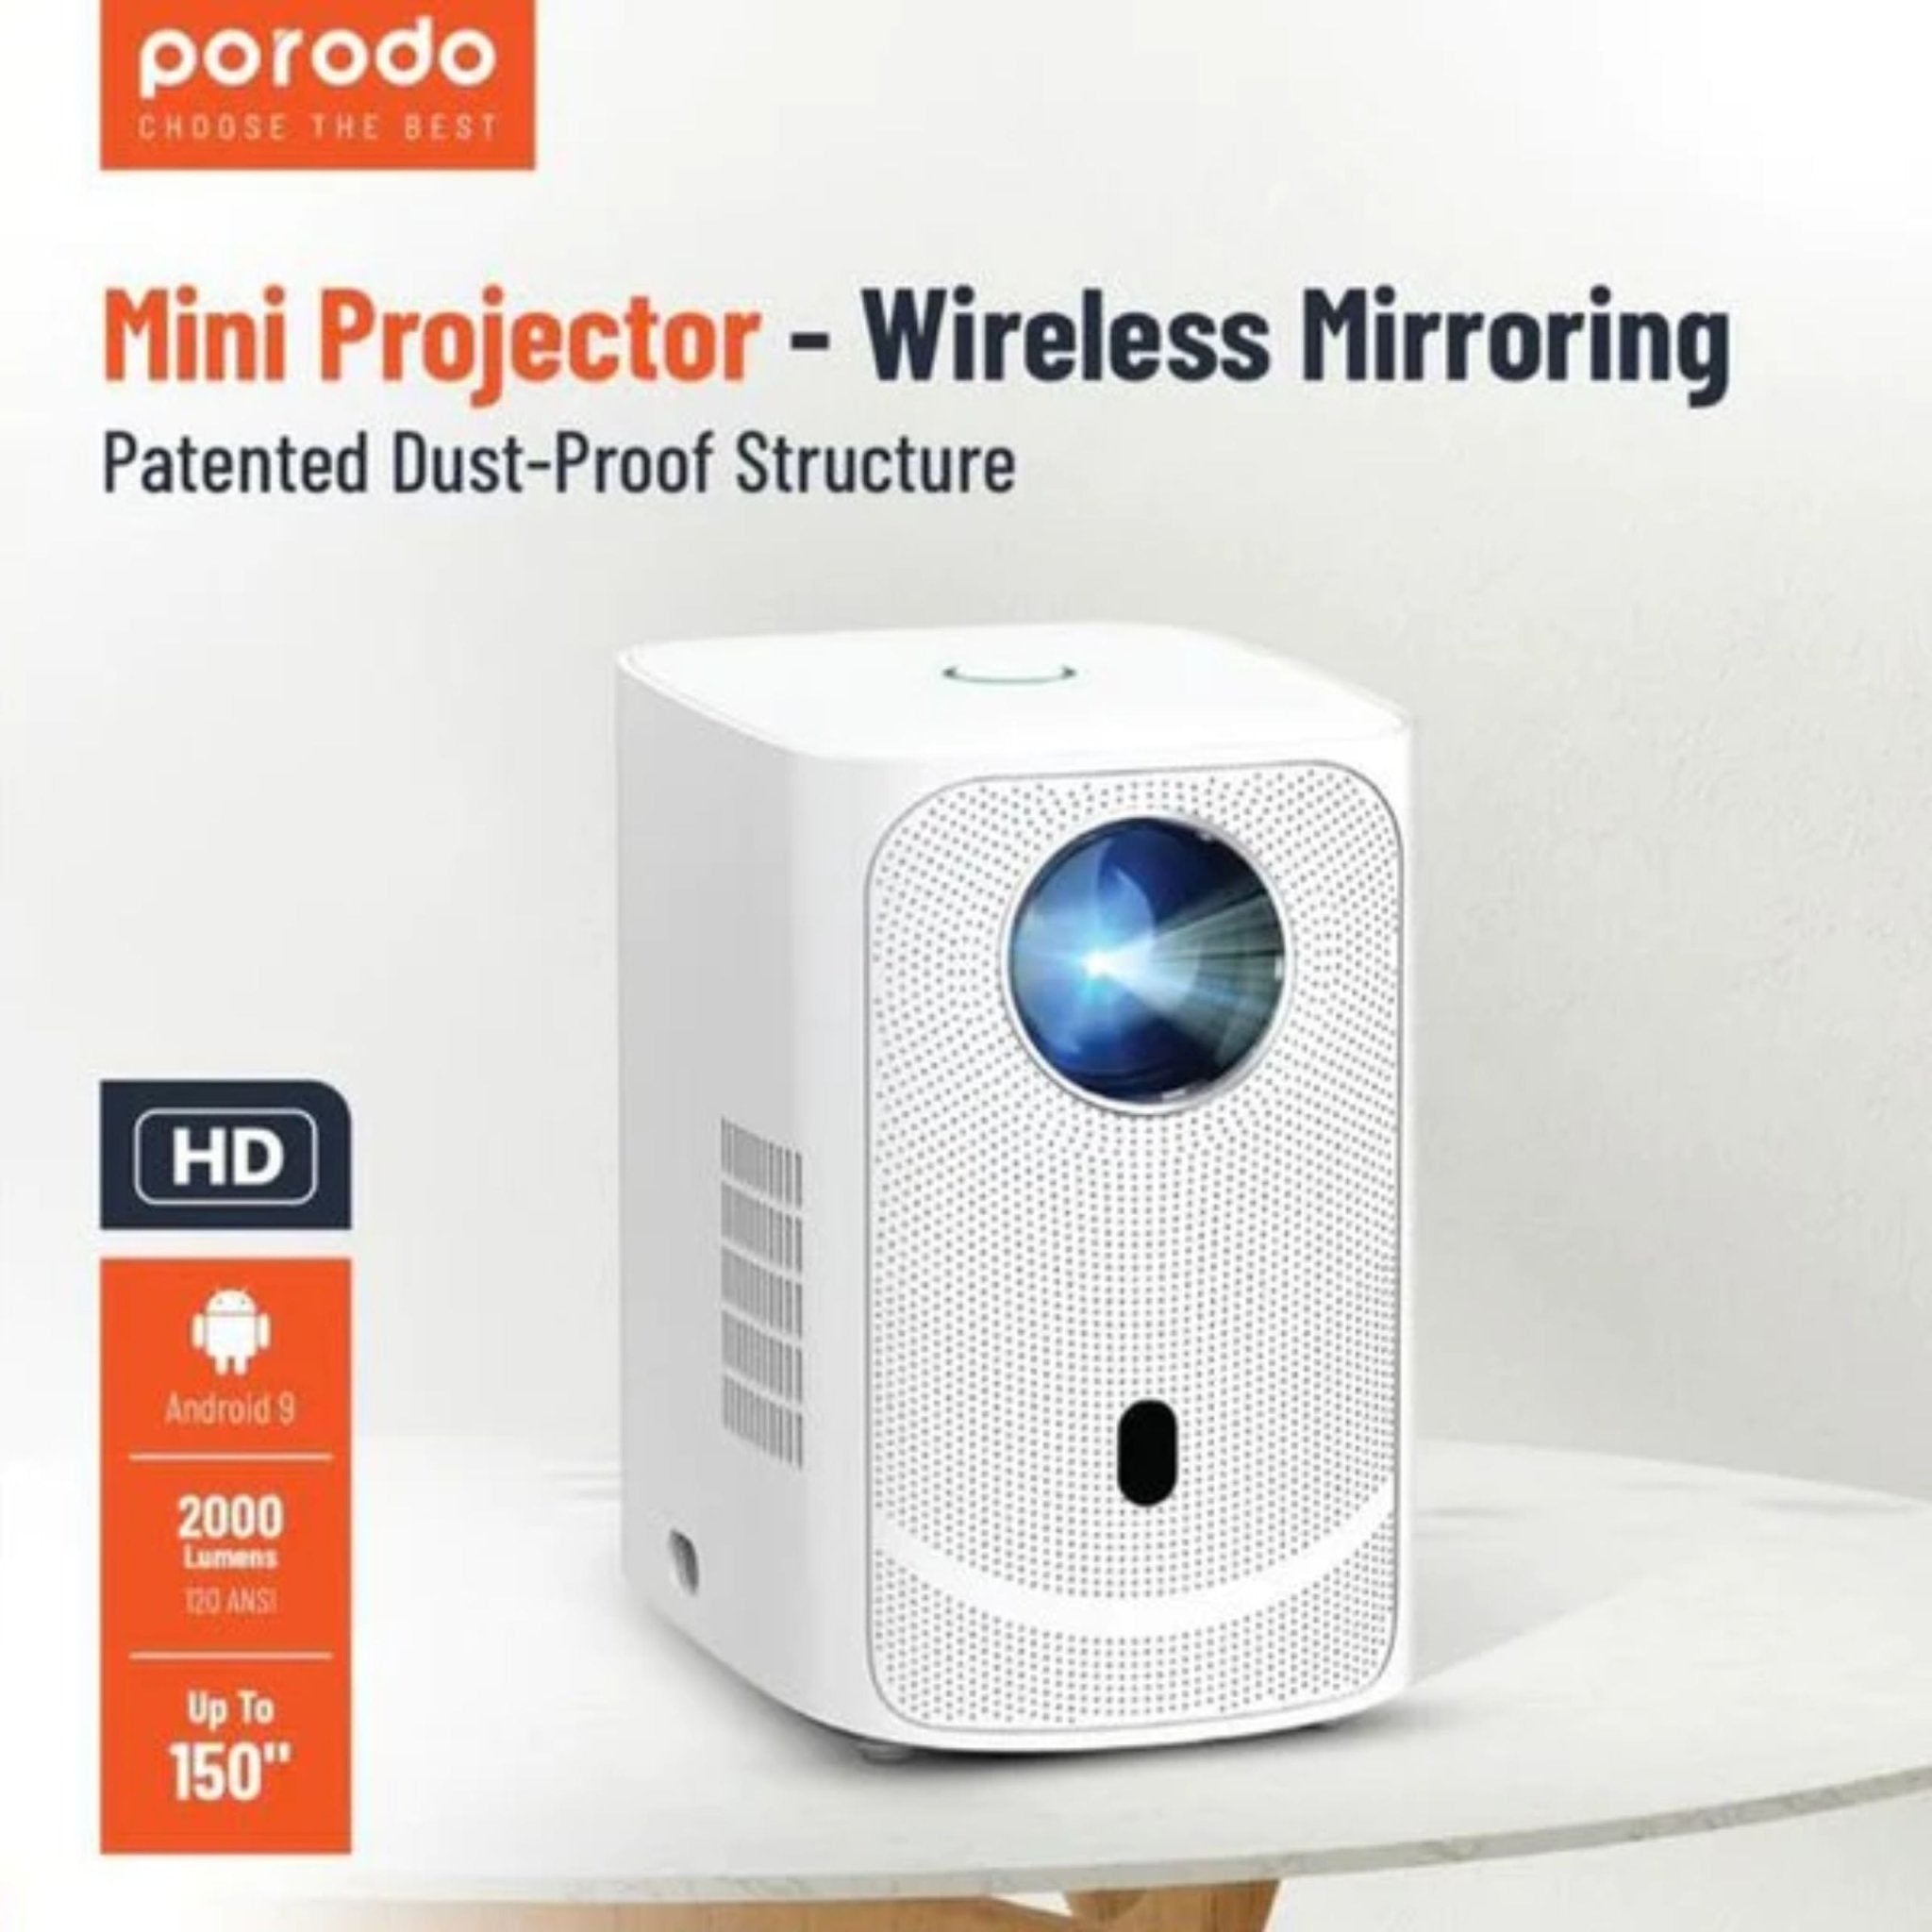 Porodo Mini Projector Wireless Mirroring Patented Dust-Proof Structure - White